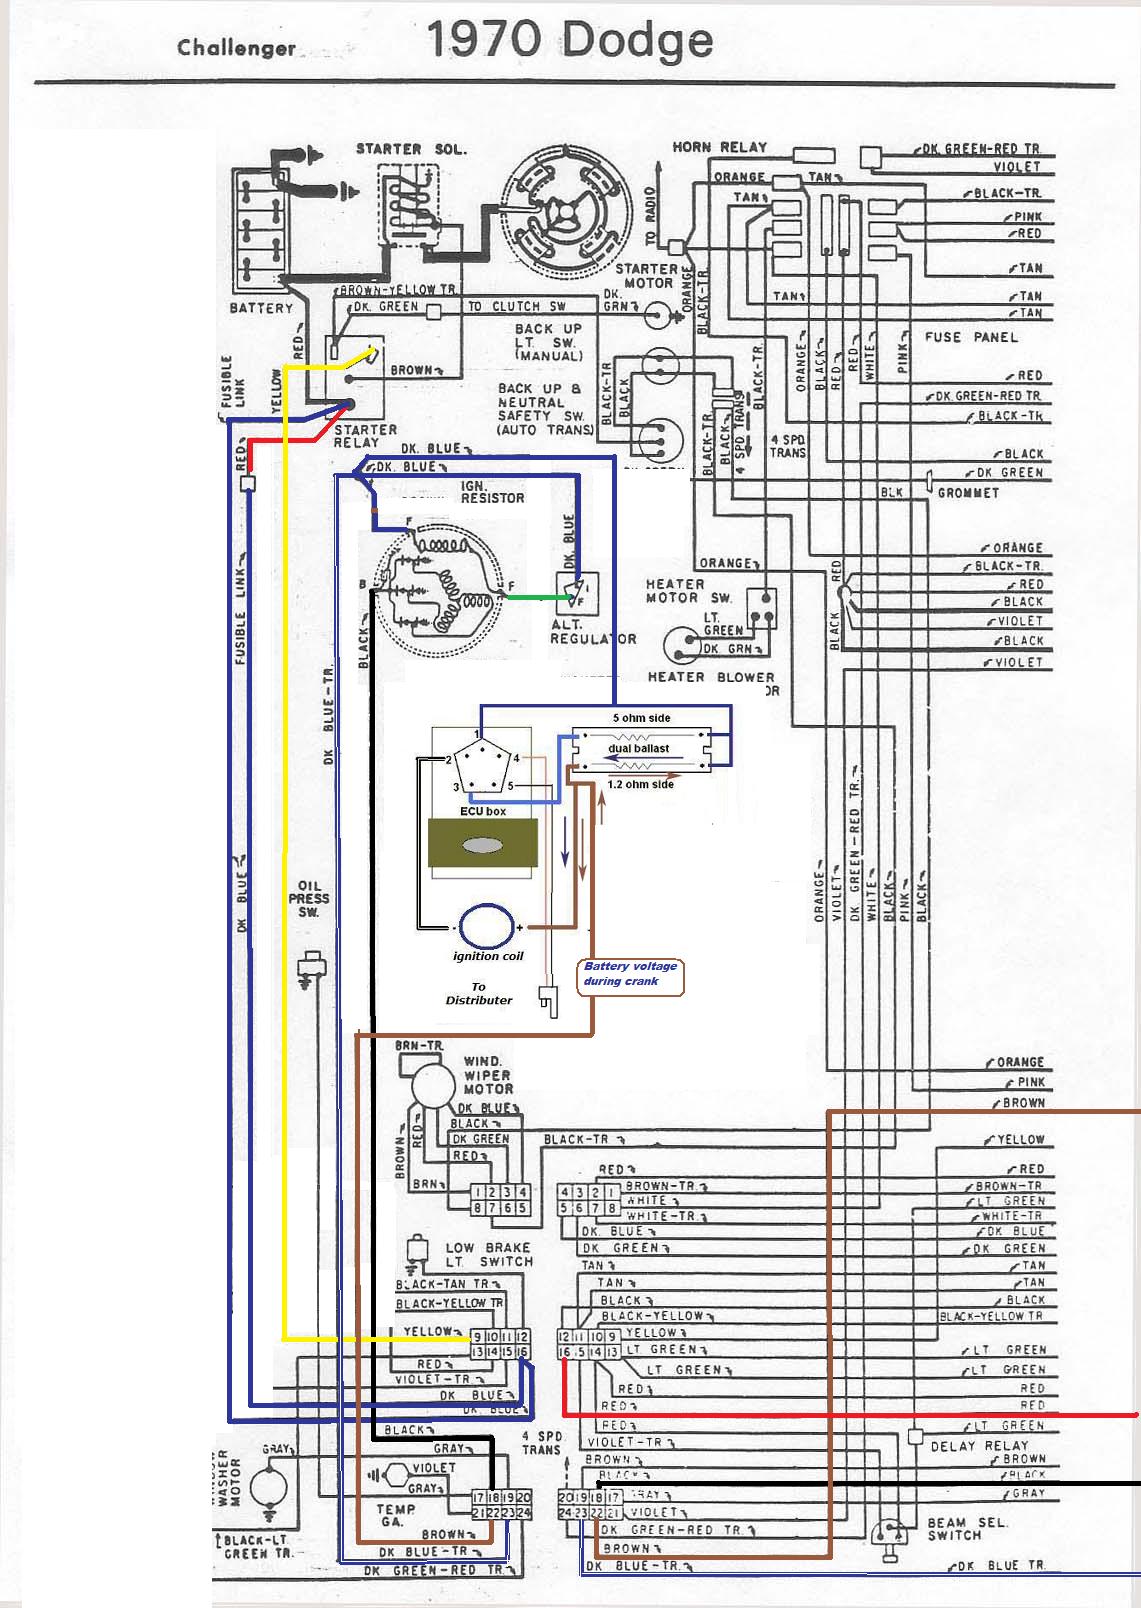 [DIAGRAM] 2017 Dodge Challenger Wiring Diagram FULL Version HD Quality